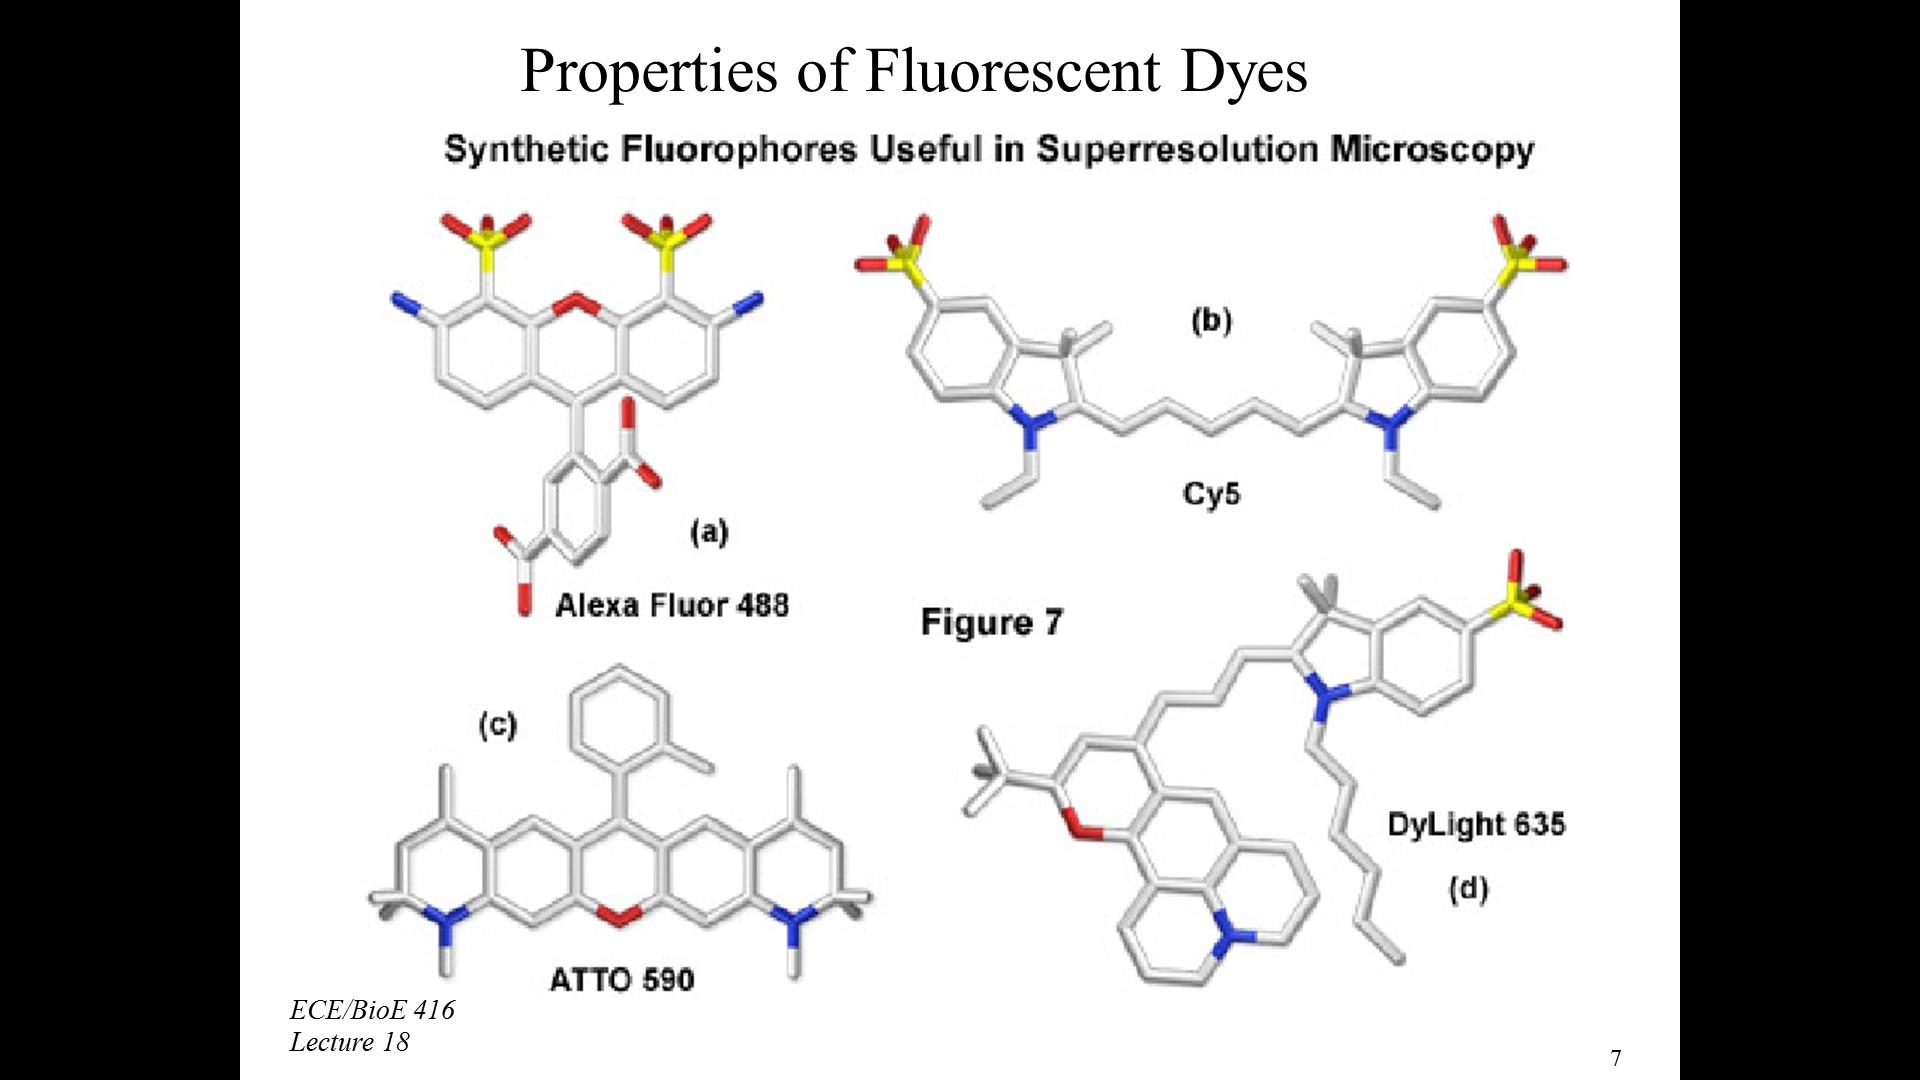 Properties of Fluorescent Dyes